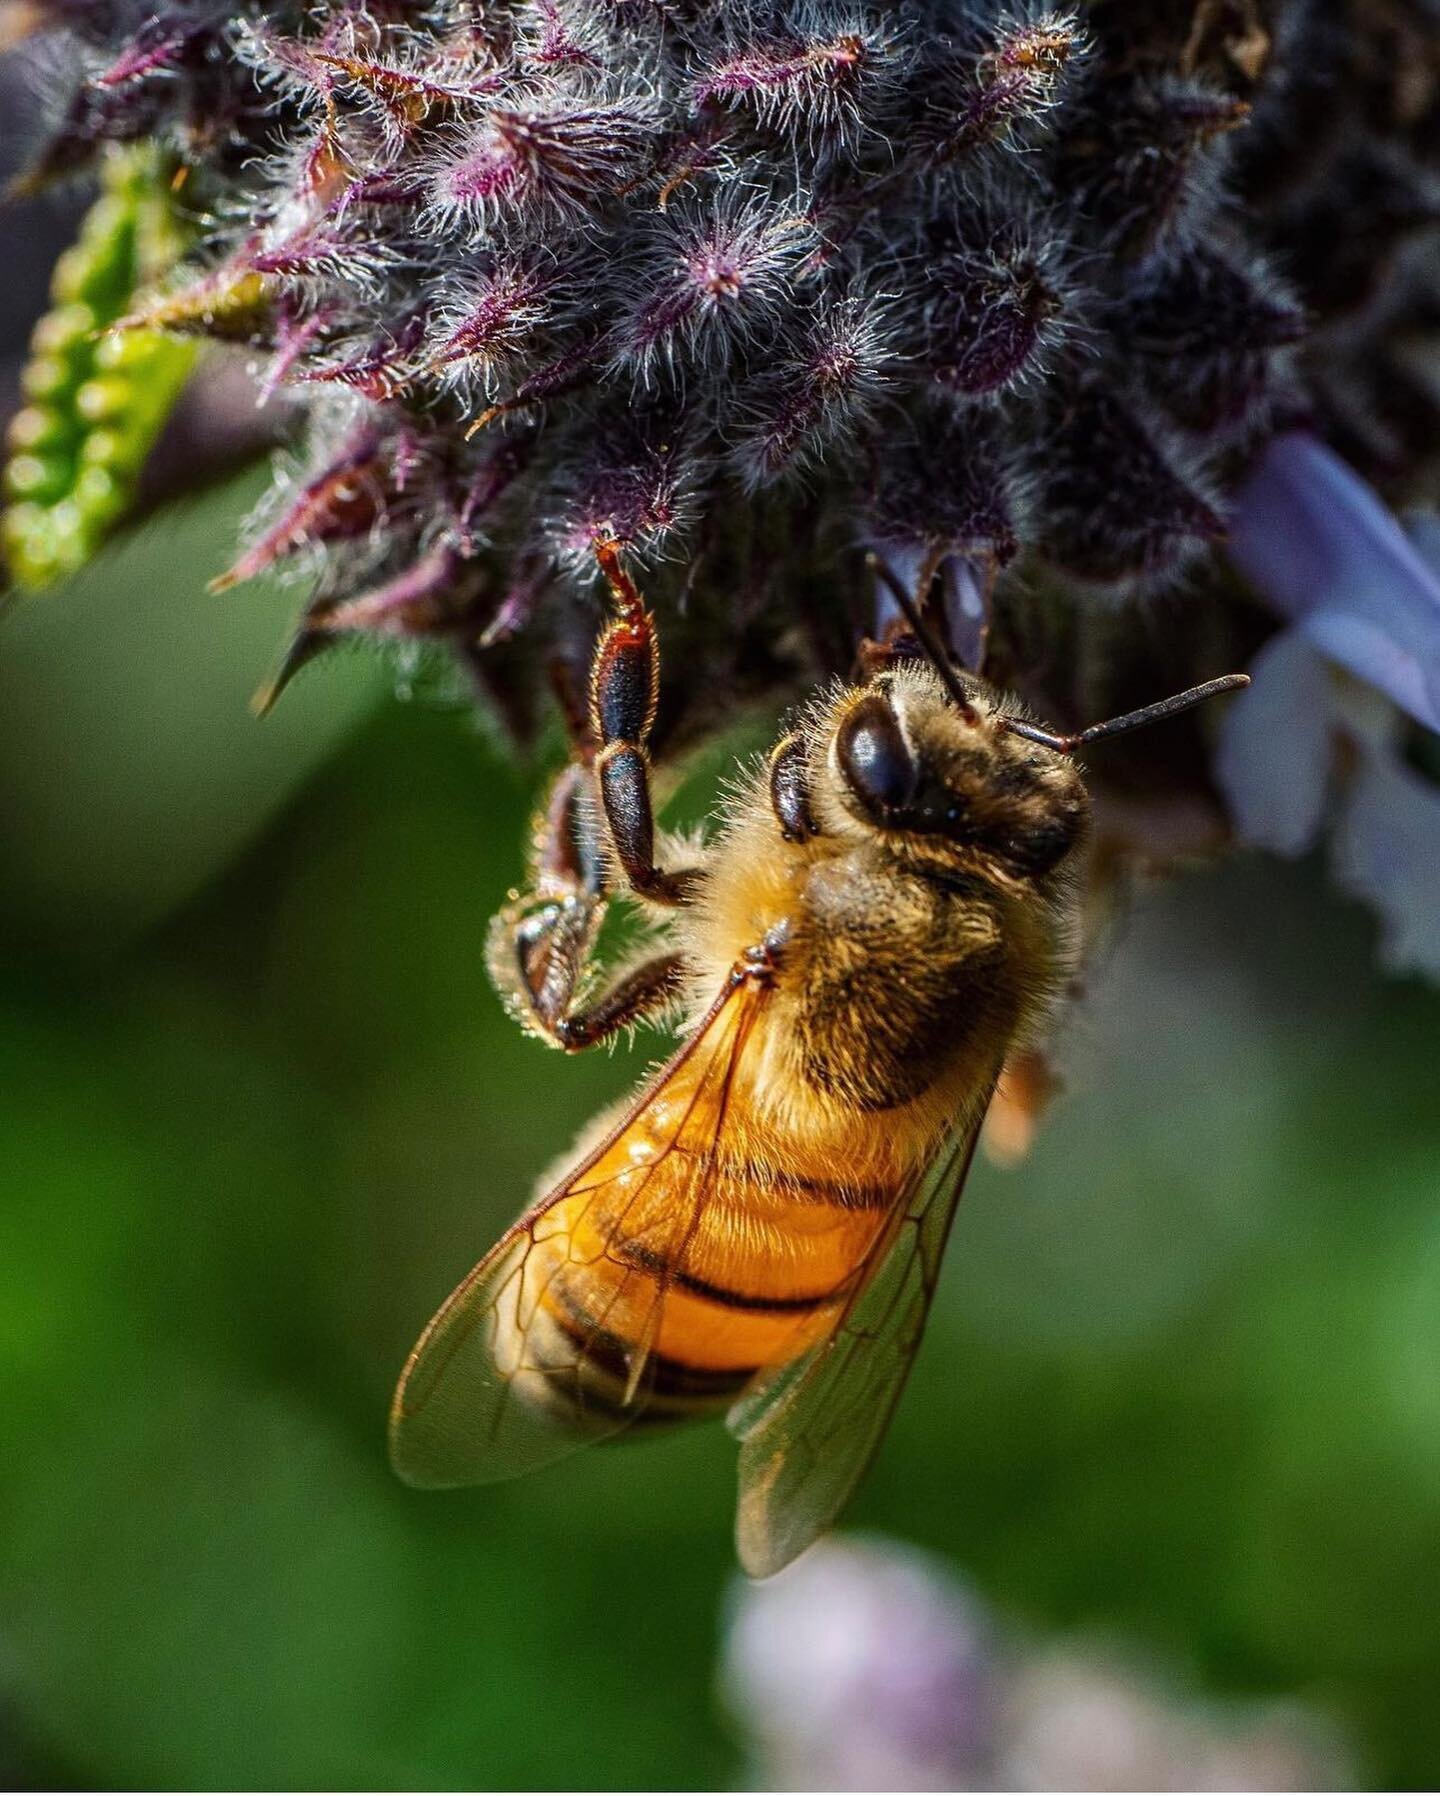 Honey bee doing what she does best🌸🐝have you entered our Praise the Pollinators Giveaway? Visit the post pinned to the top of page to enter. Giveaway closes April 17!

📸@checkthetechnick